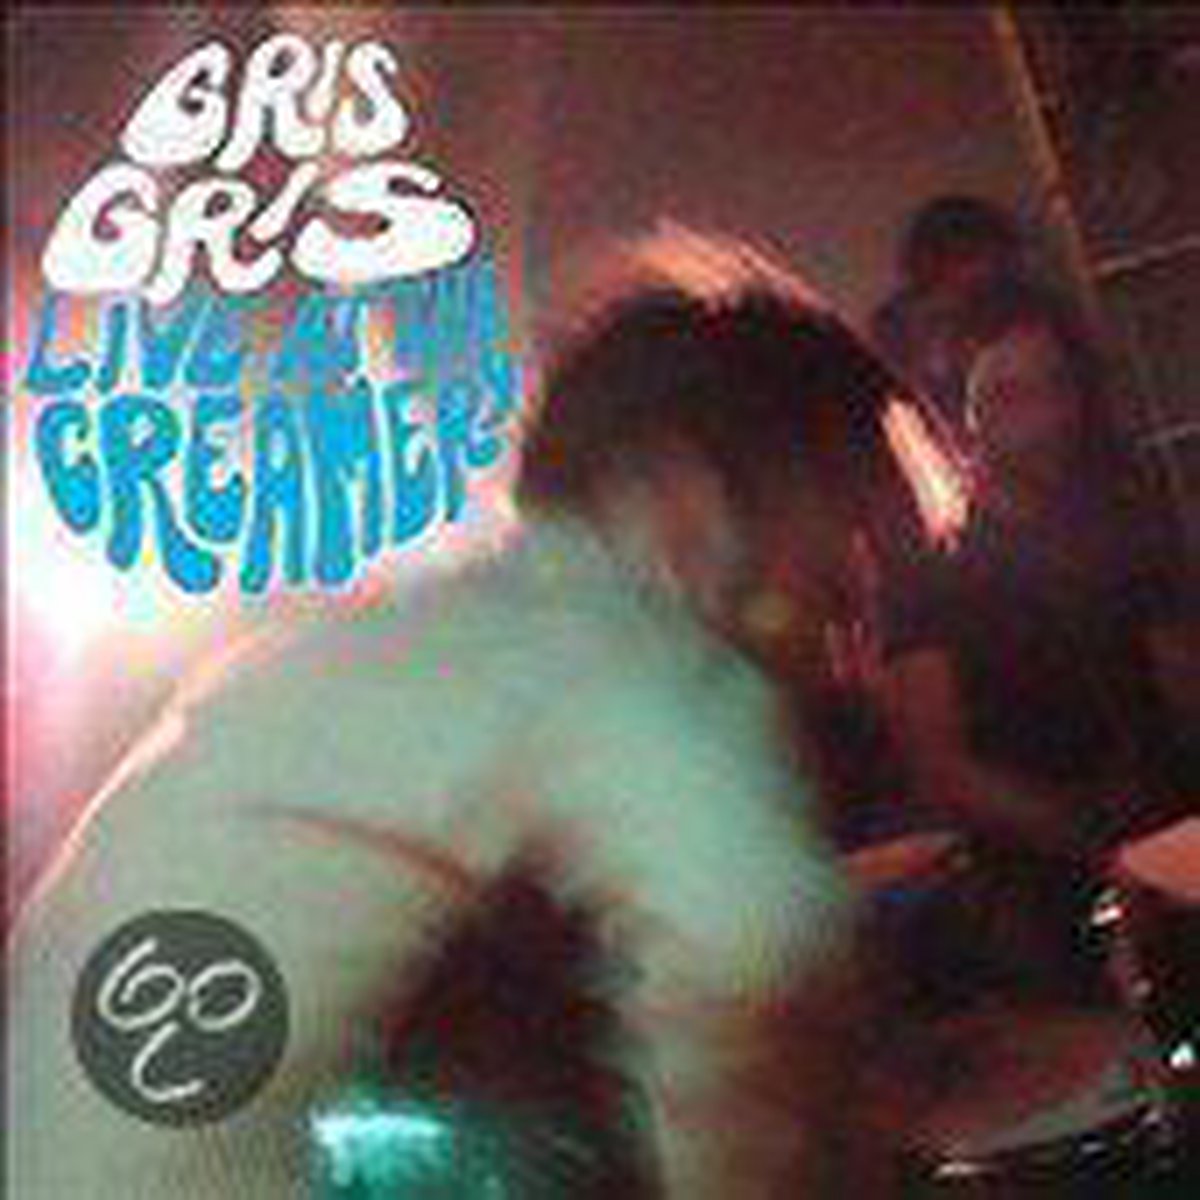 Live at the Creamery - The Gris Gris